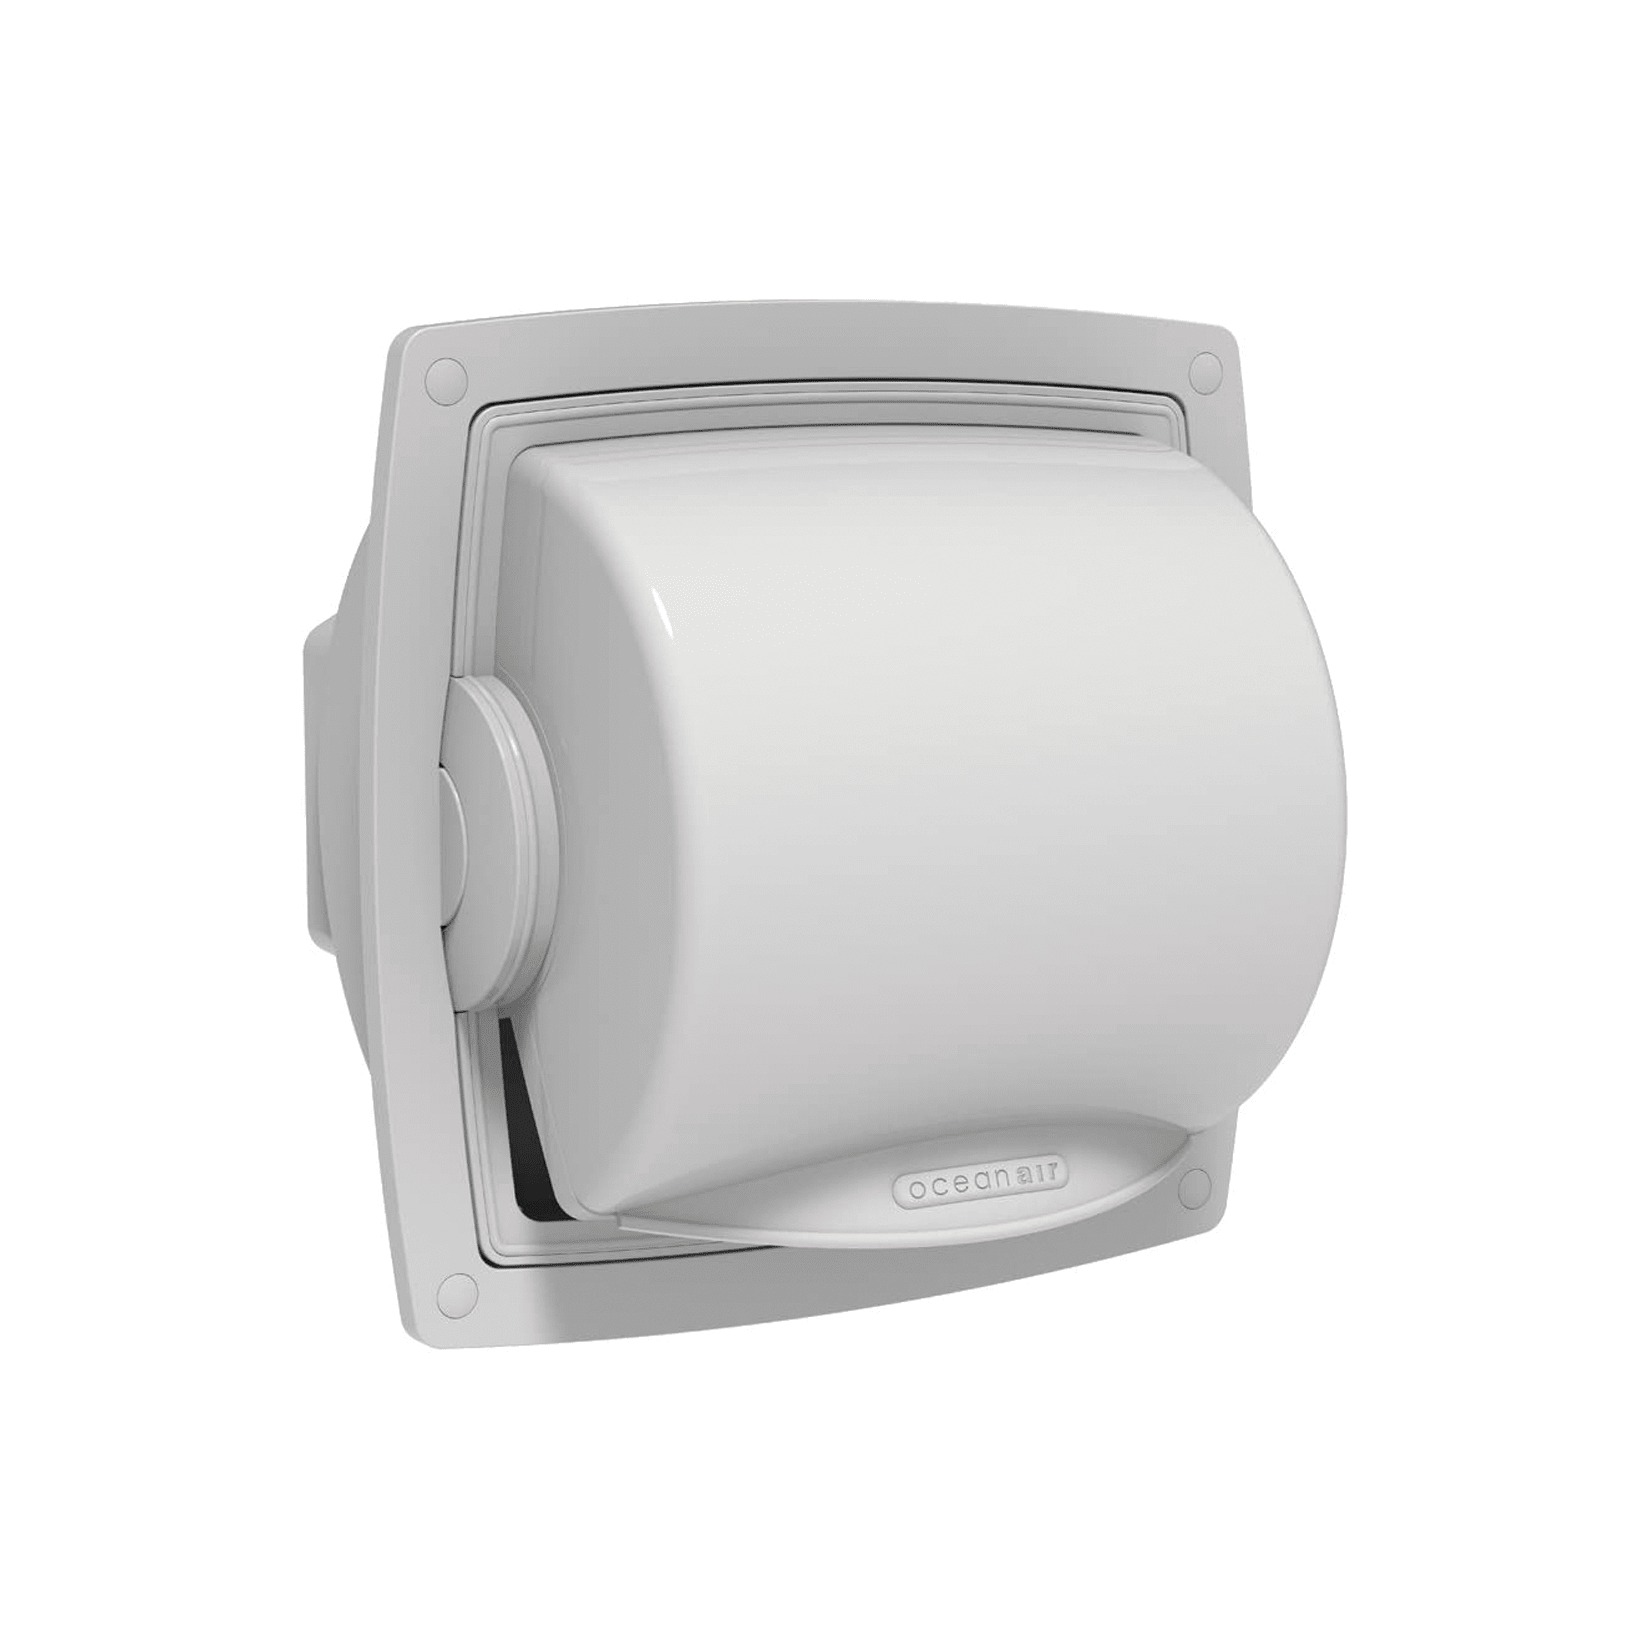 https://image.fisheriessupply.com/c_lpad,dpr_3.0,w_550,h_550,d_imageComingSoon-tiff/f_auto,q_auto/v1/static-images/ocean-air-blinds-dry-roll-toilet-paper-holder-closed